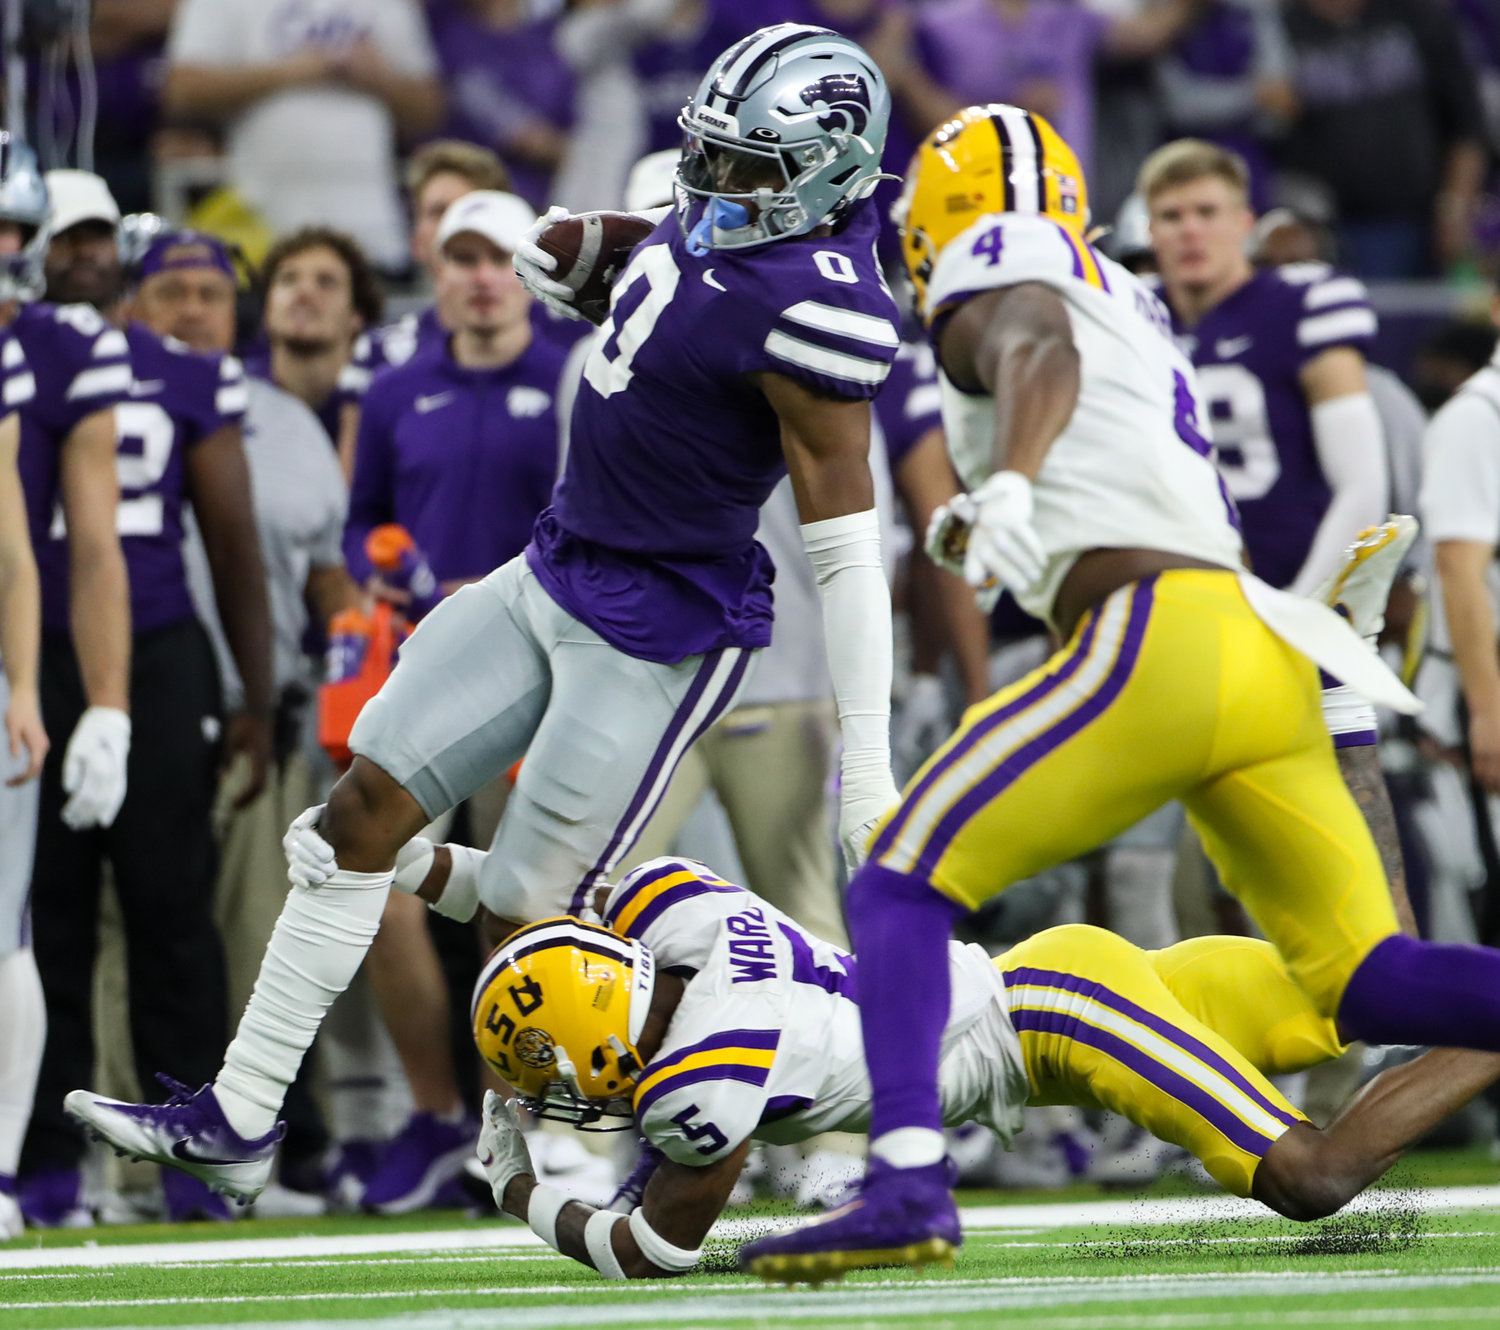 LSU Tigers safety Jay Ward (5) tackles Kansas State Wildcats tight end Daniel Imatorbhebhe (0) during the TaxAct Texas Bowl on Jan. 4, 2022 in Houston, Texas.